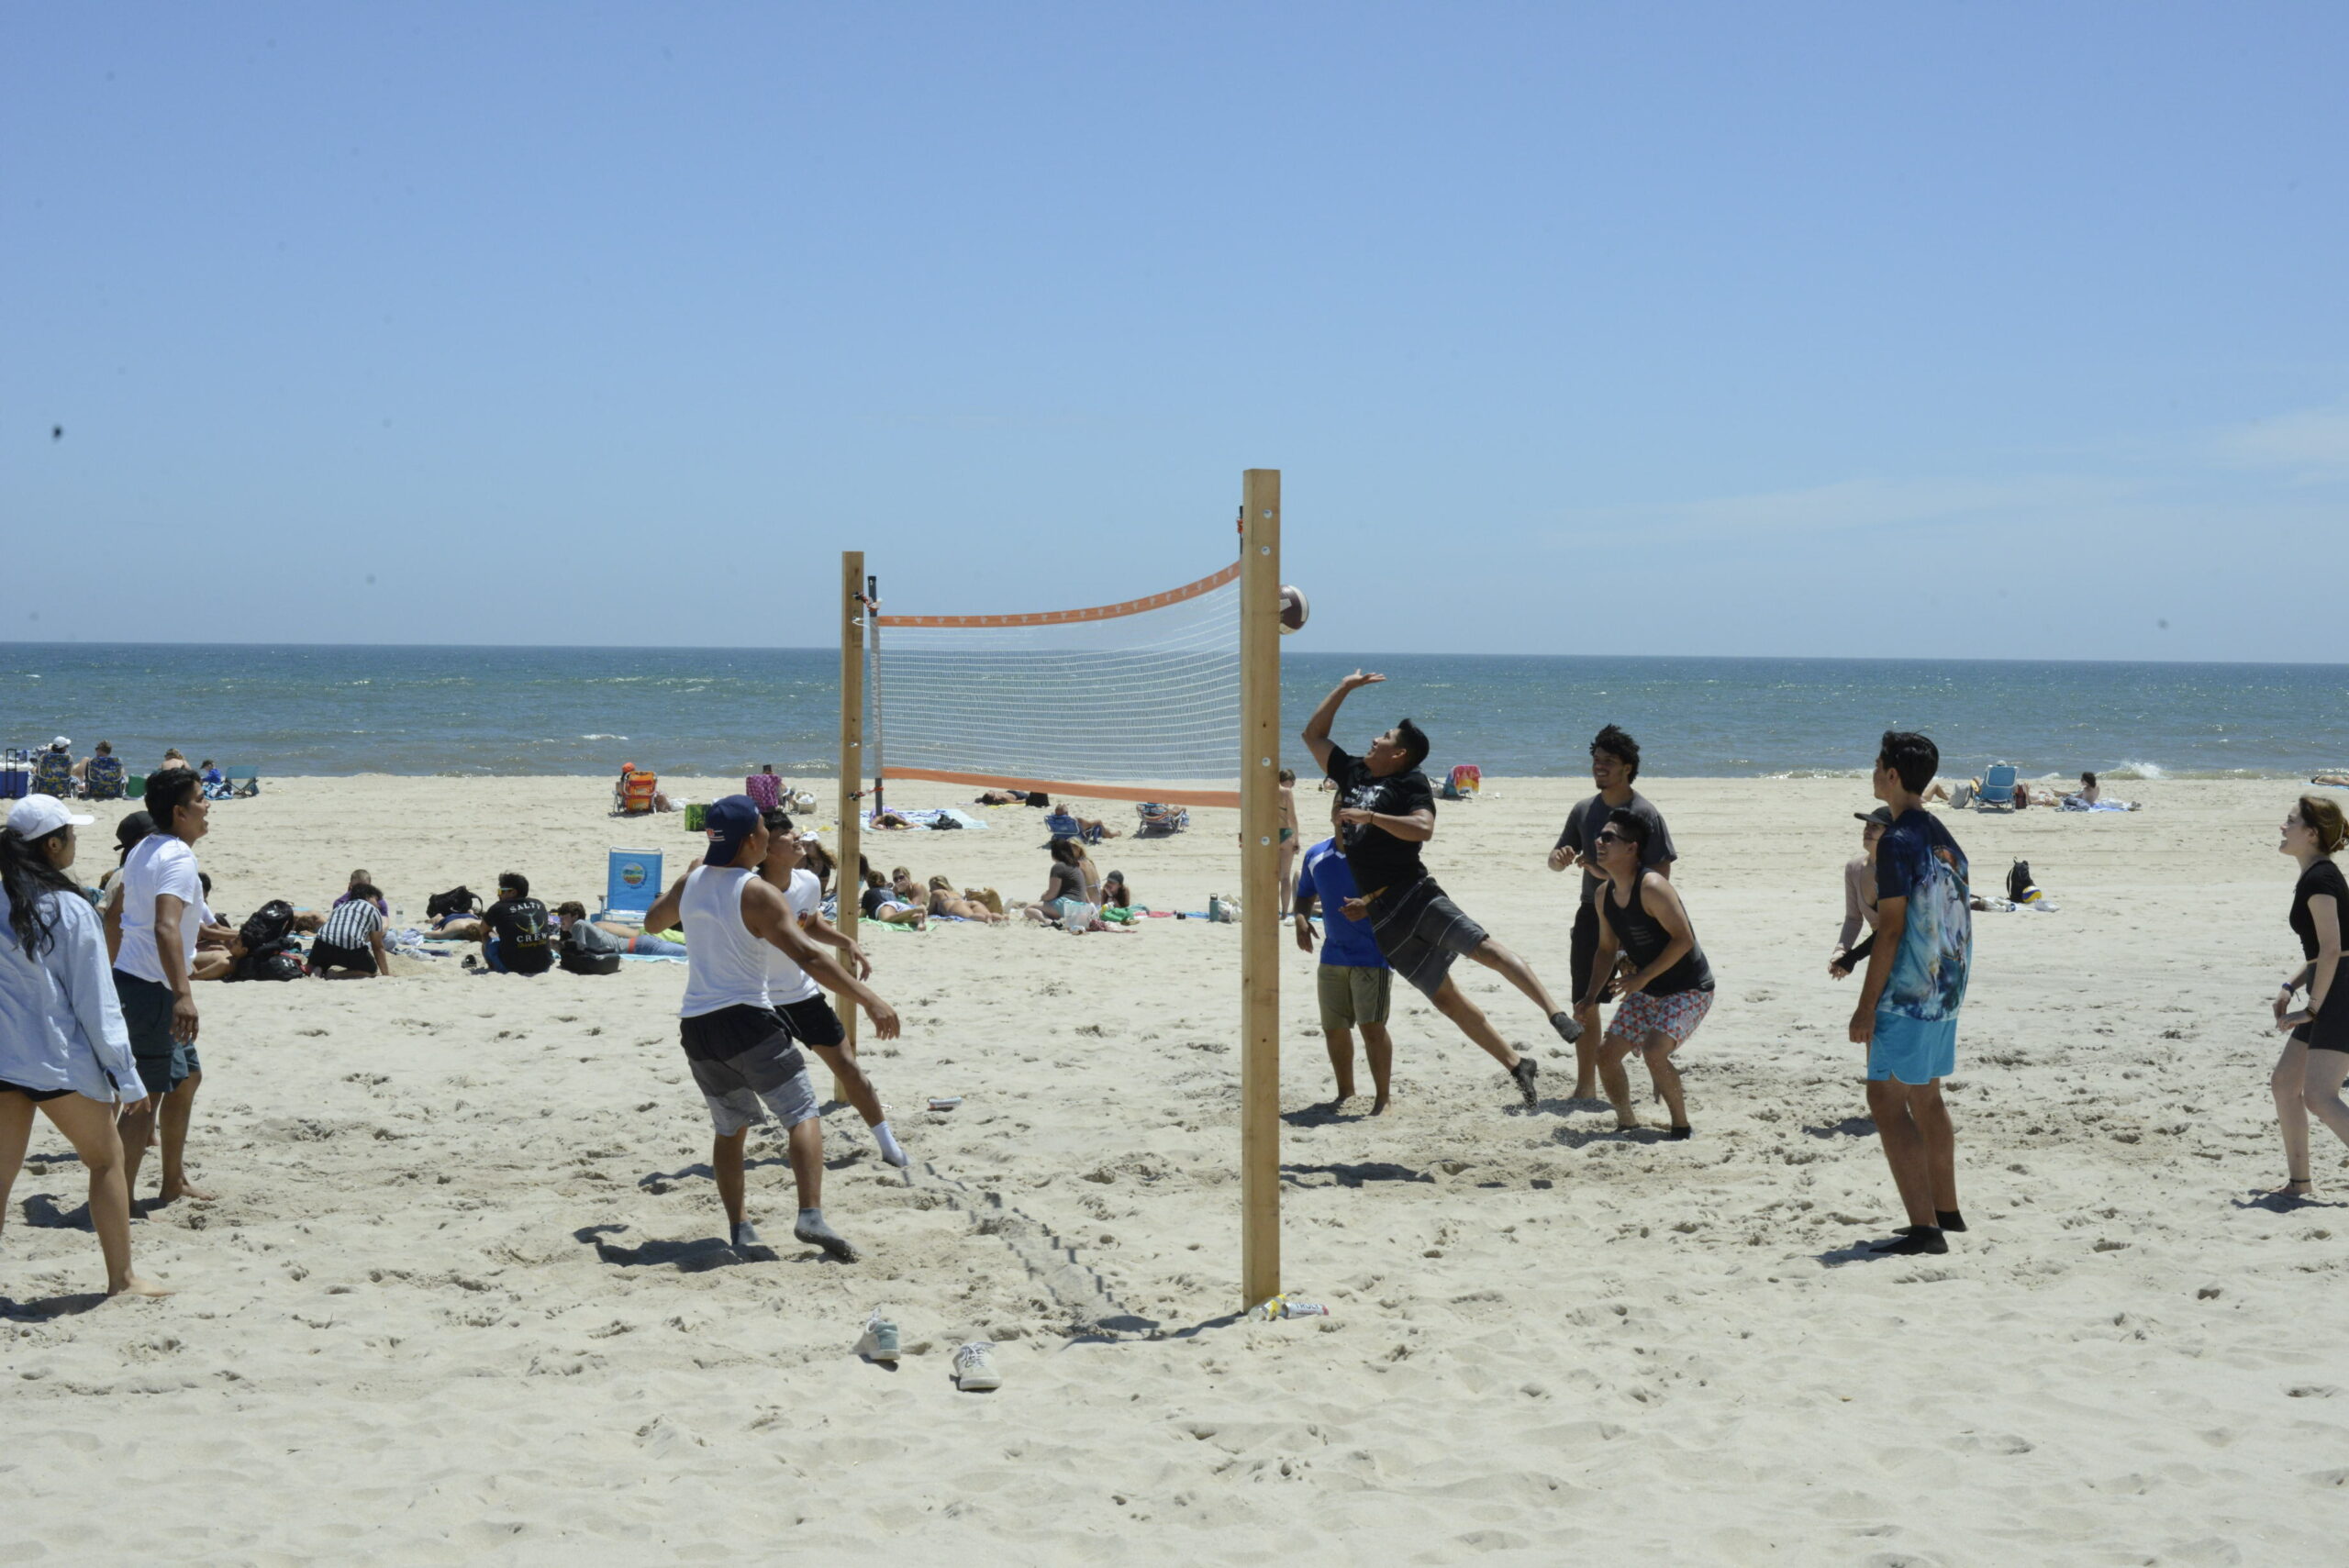 BY JULIA HEMING Southampton High School seniors played volleyball during their Day at the Beach.